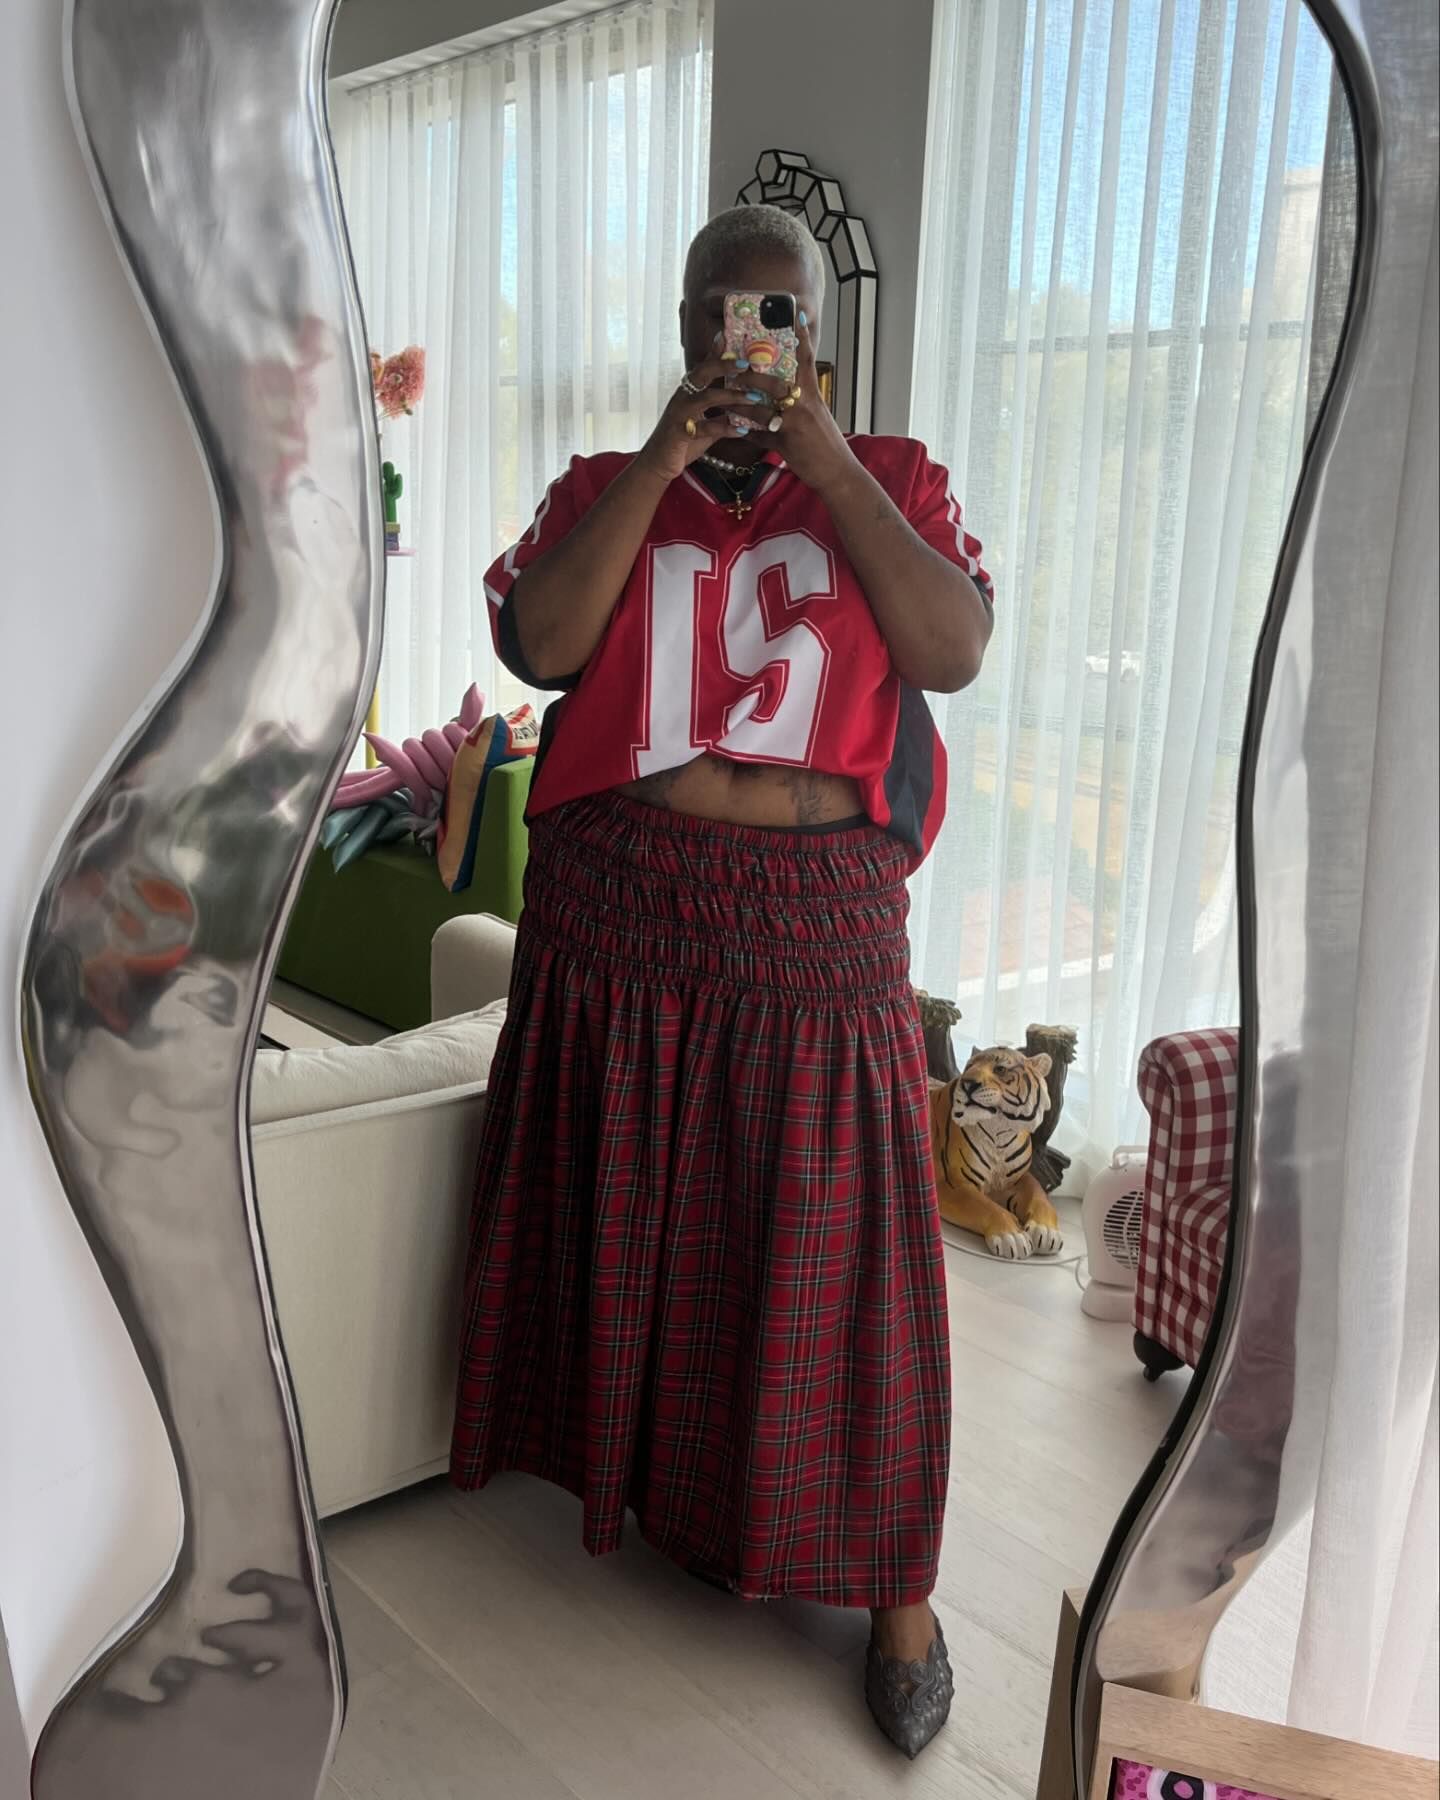 Flex wears jersey and plaid skirt and black pointed flats